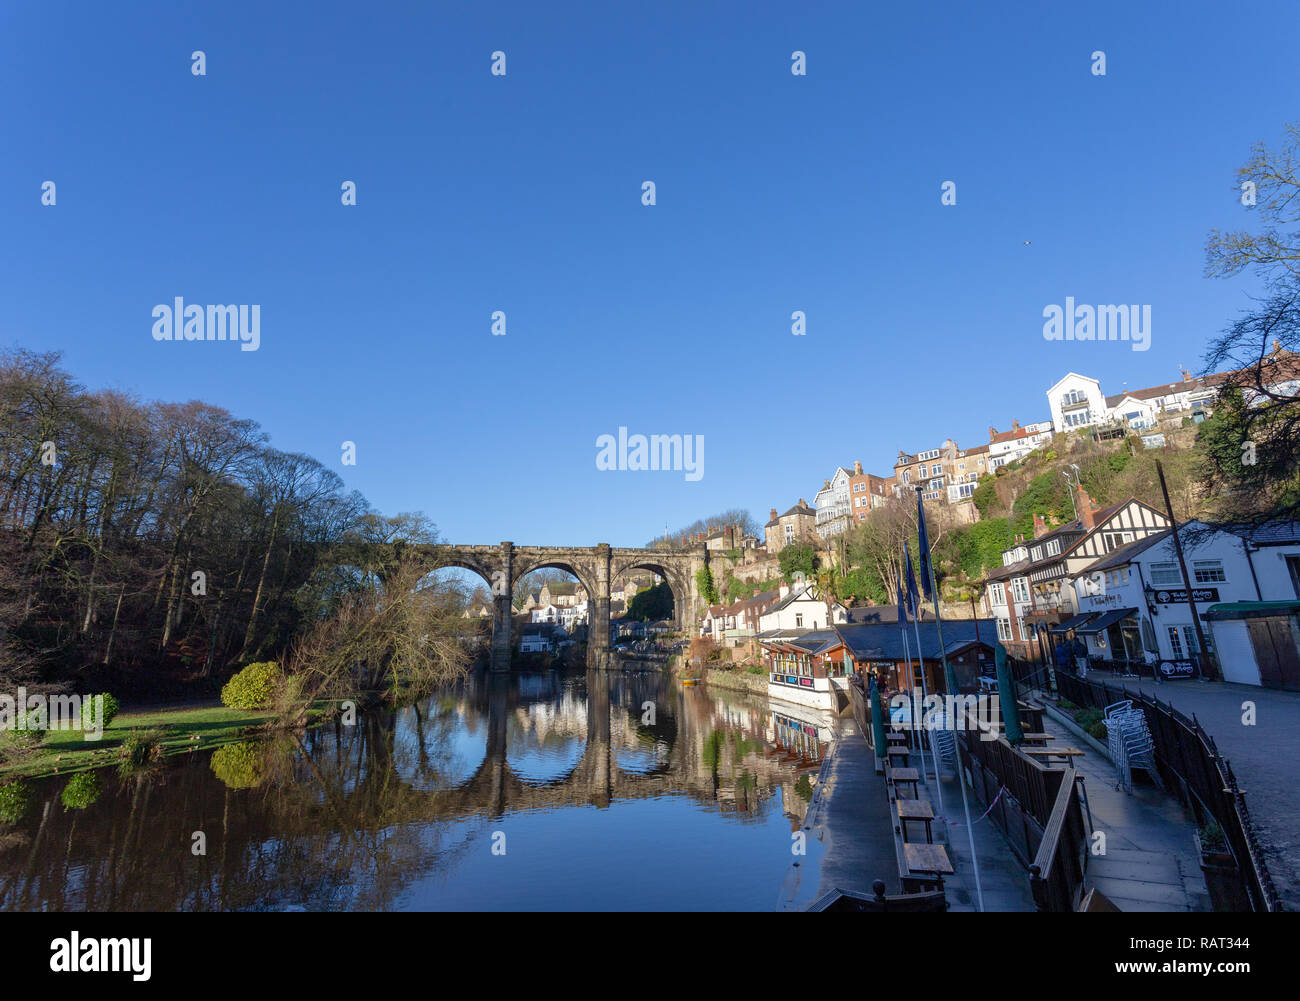 Knaresborough Railway Viaduct from next to the River Nidd, North Yorkshire, England, UK Stock Photo